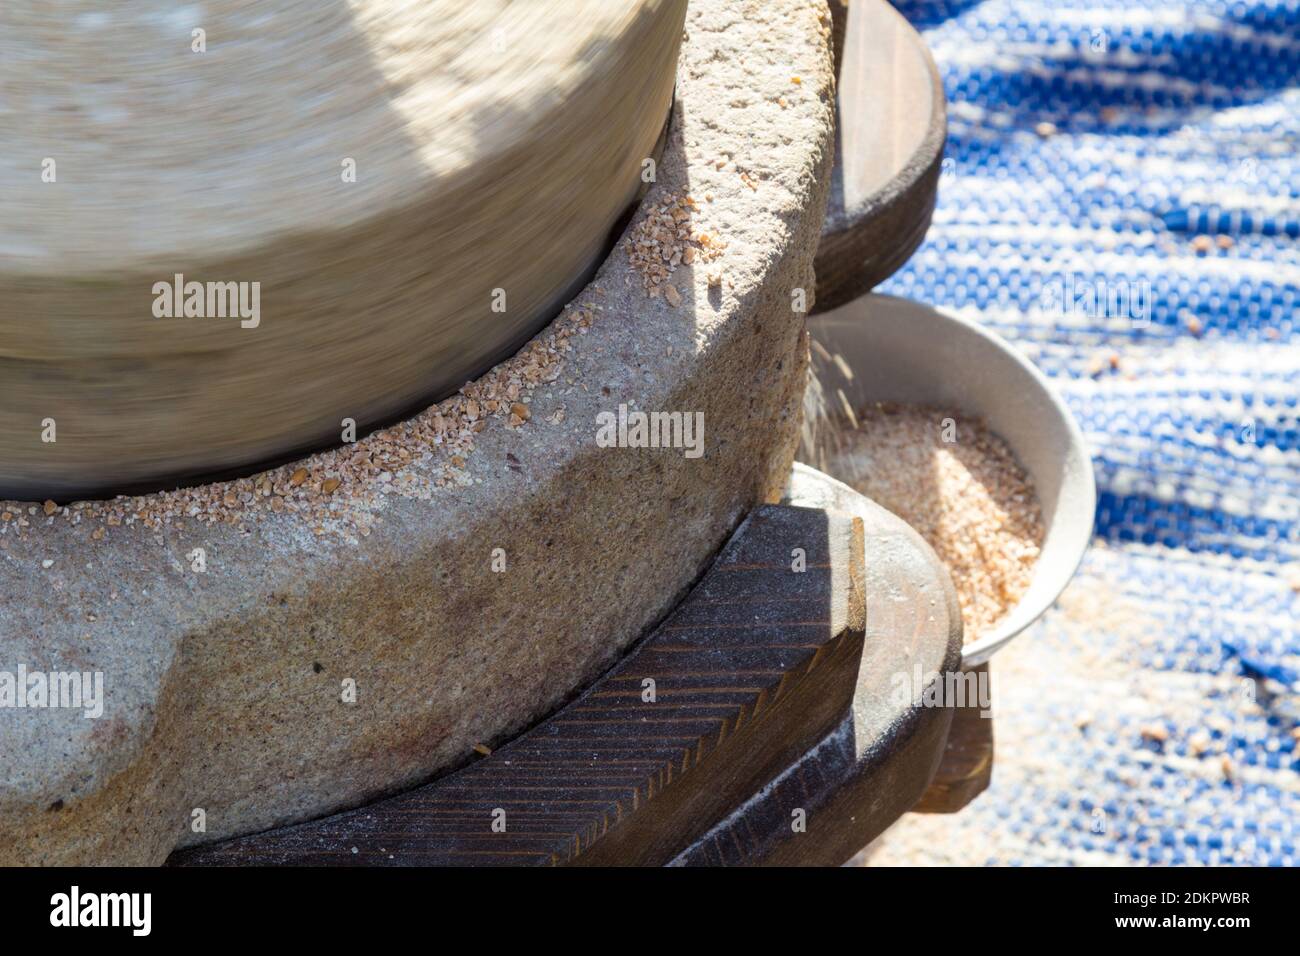 Close-up of hand operated millstone grinding wheat Stock Photo